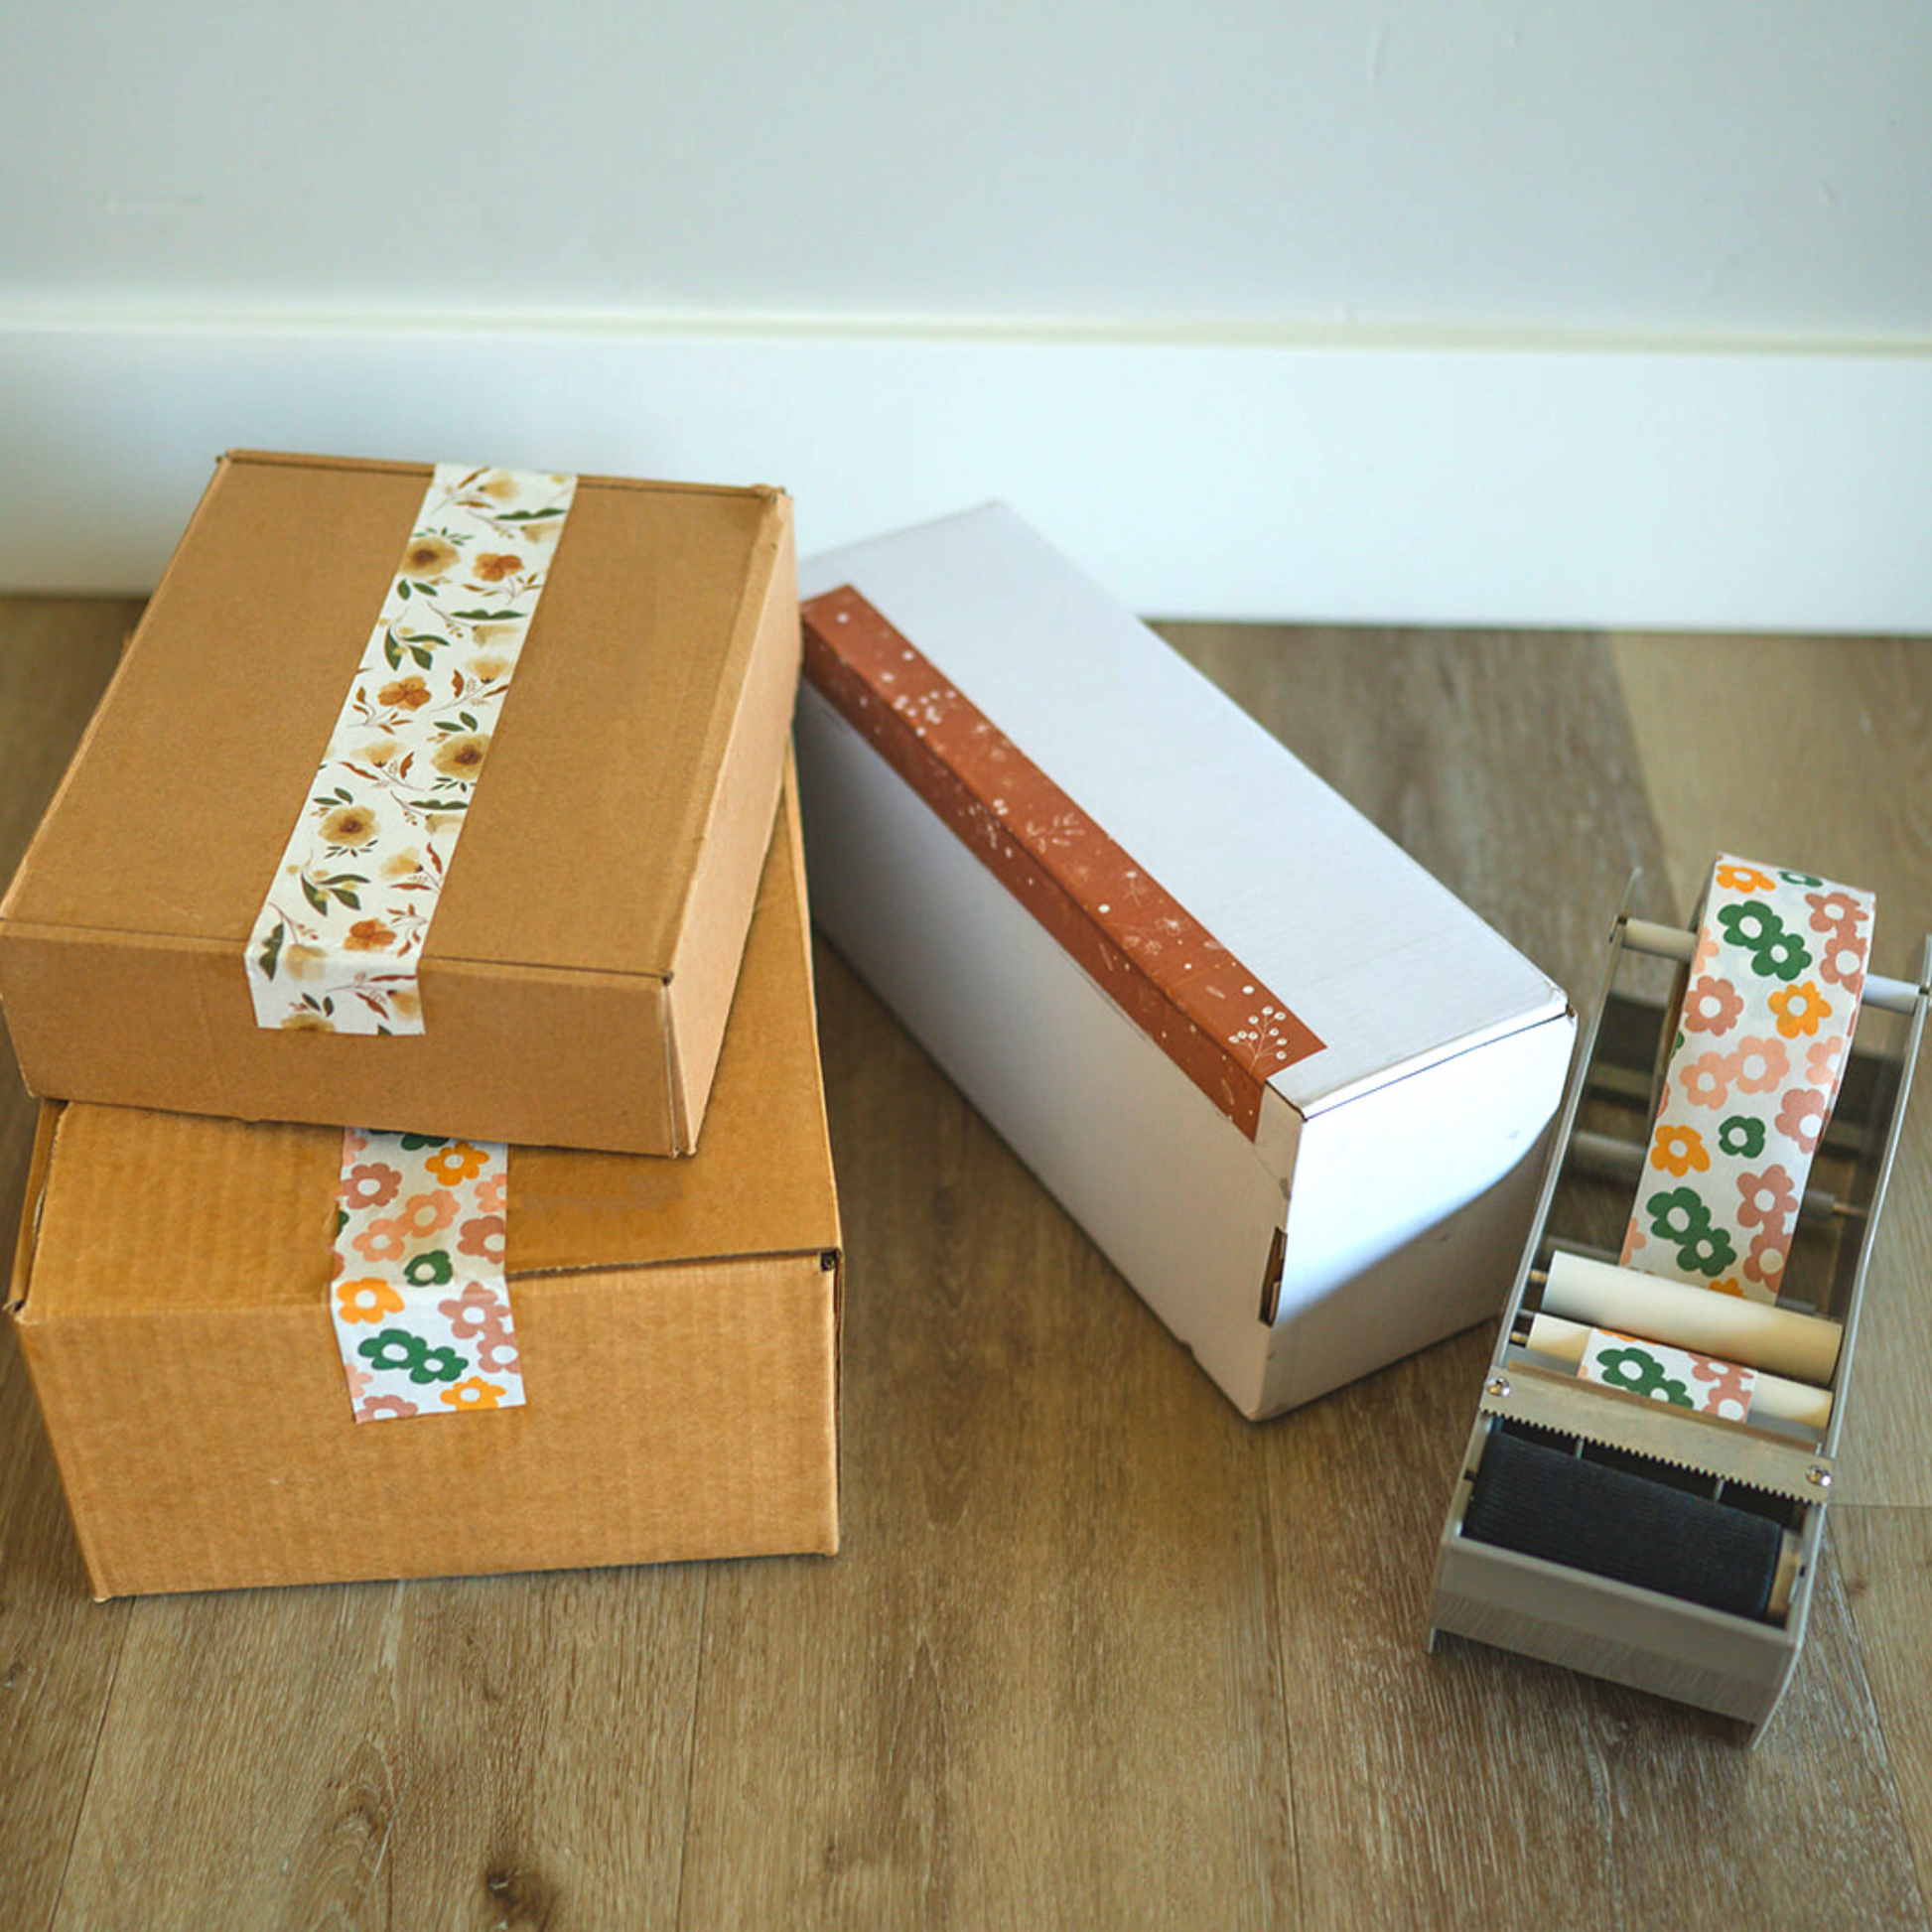 A box with a Packing Tape - Camelia Bloom dispenser and a box with a Packing Tape - Camelia Bloom dispenser from impack.co.